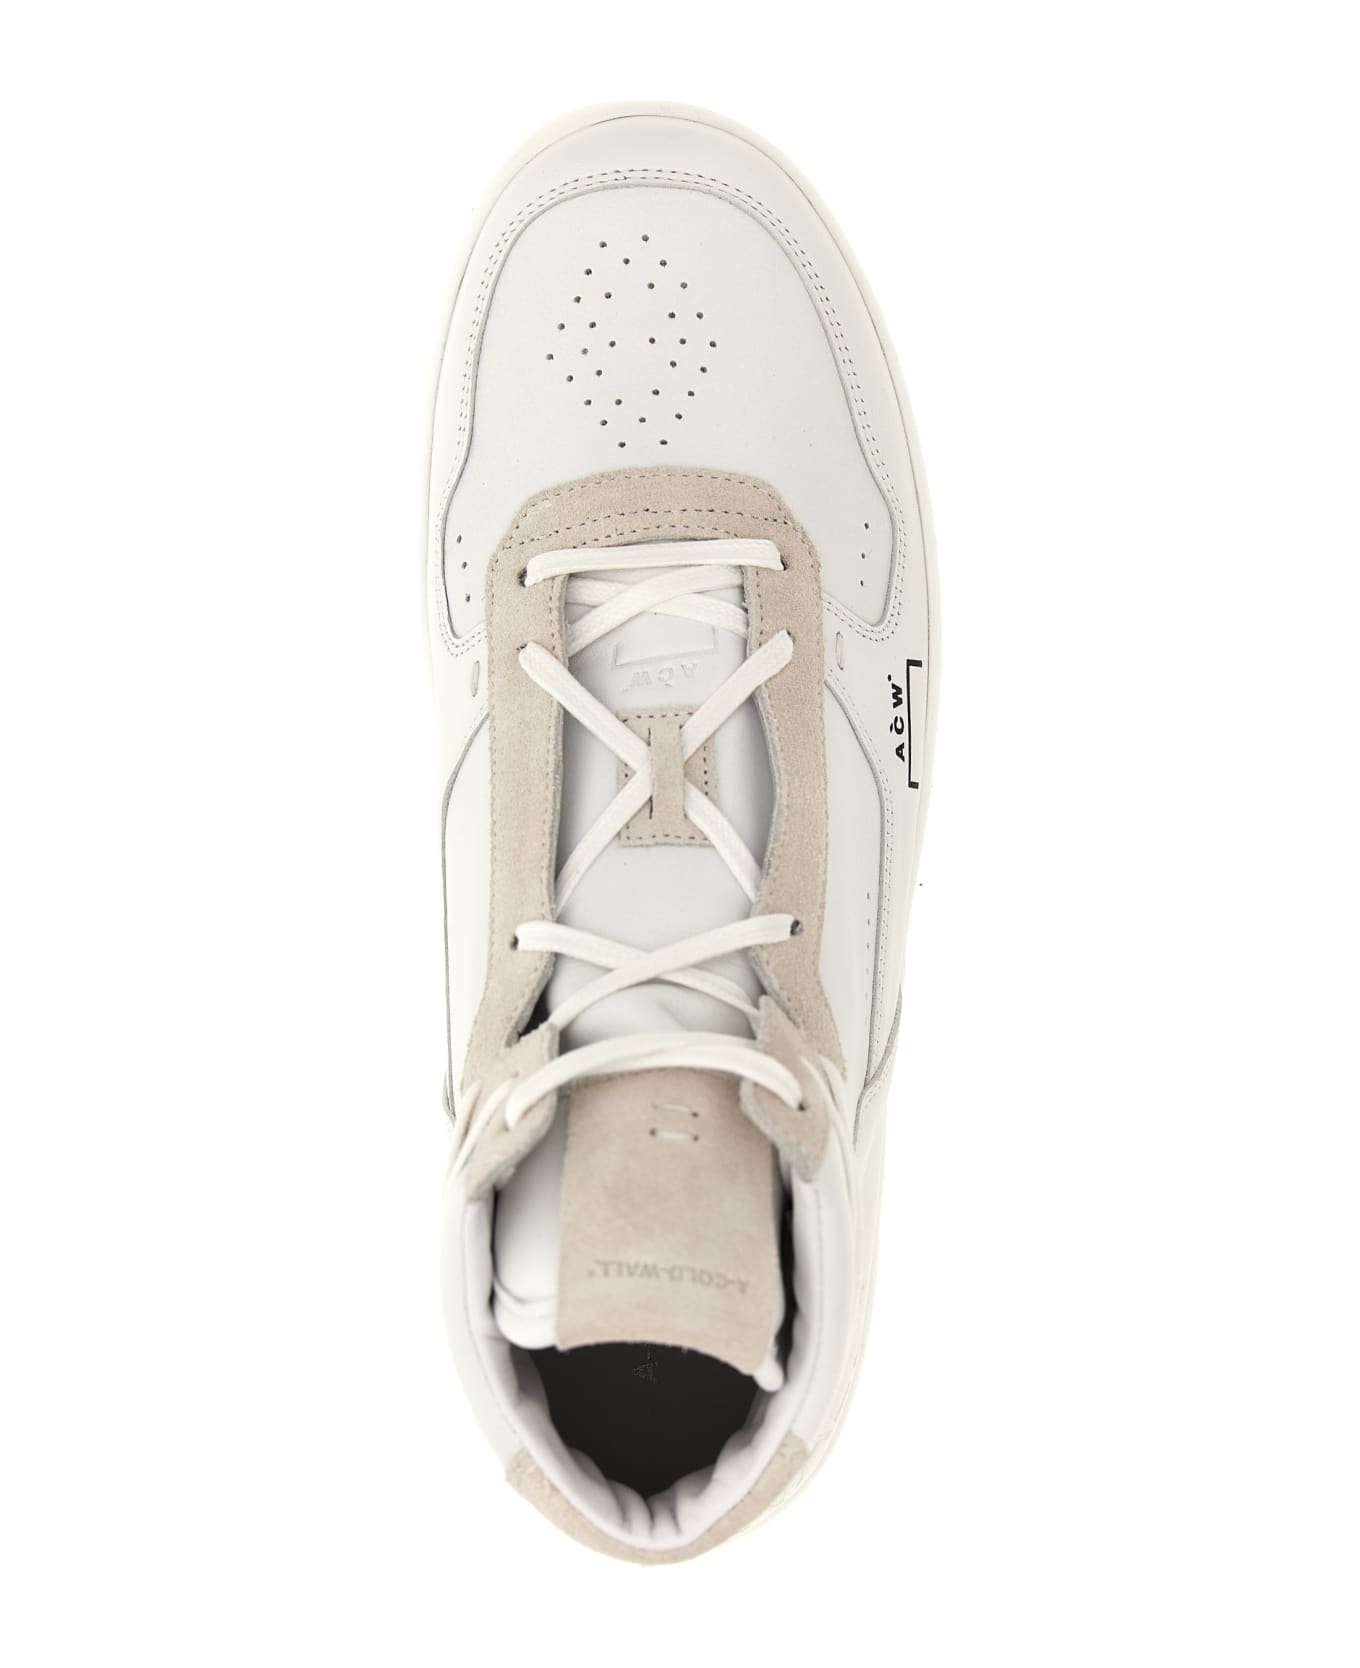 A-COLD-WALL 'luol Hi Top' Sneakers - White